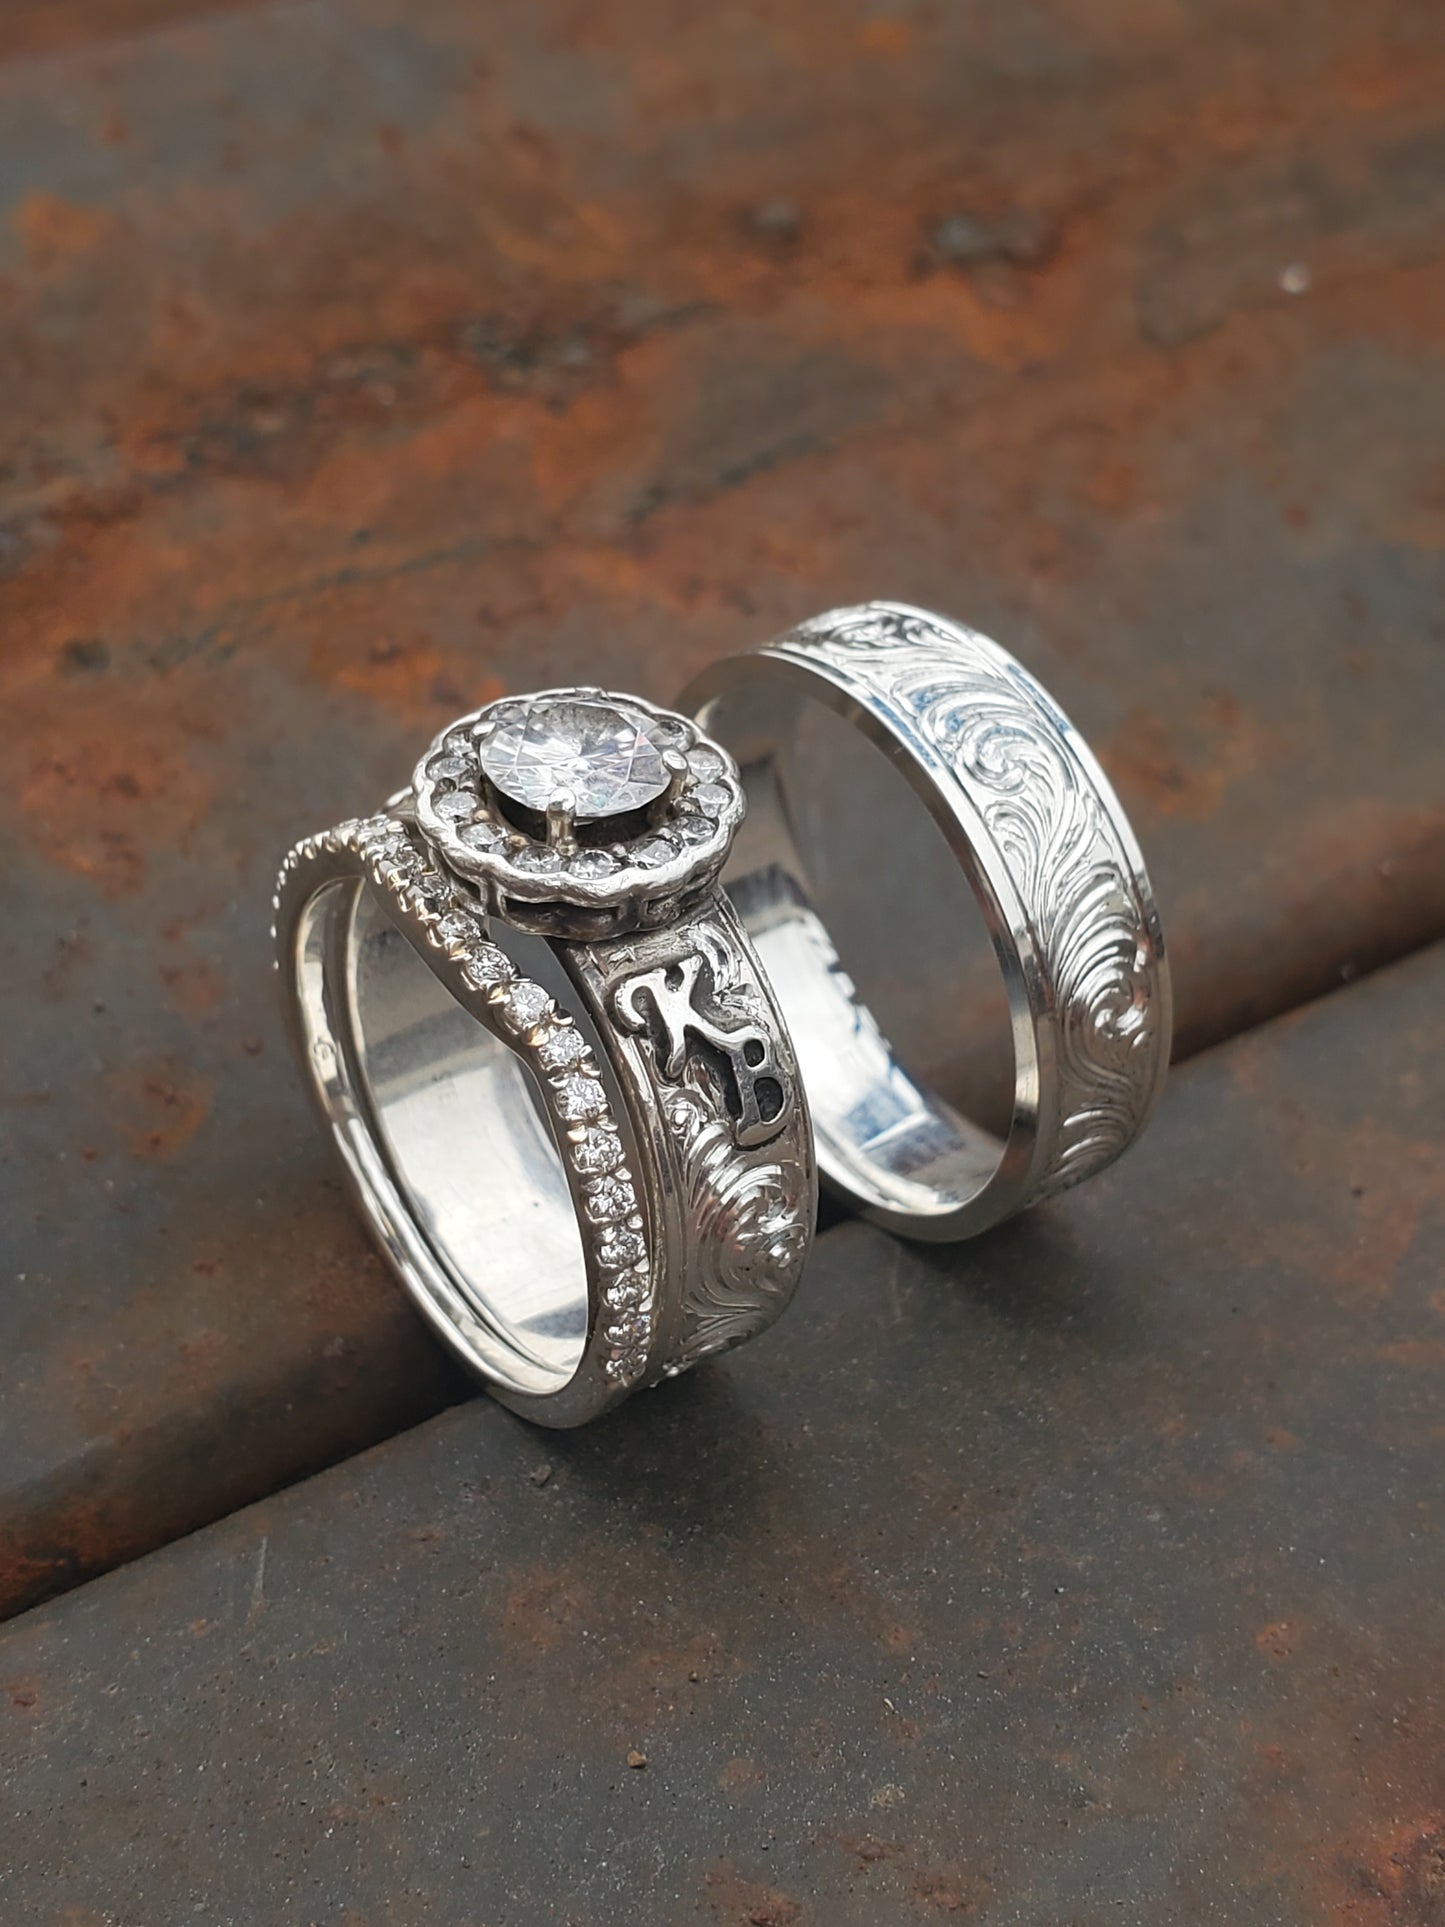 Brittany Set: Western Wedding Ring Set, Sterling Silver Western Ring Set, Men's and Women's Wedding Bands, Western Engagement Ring